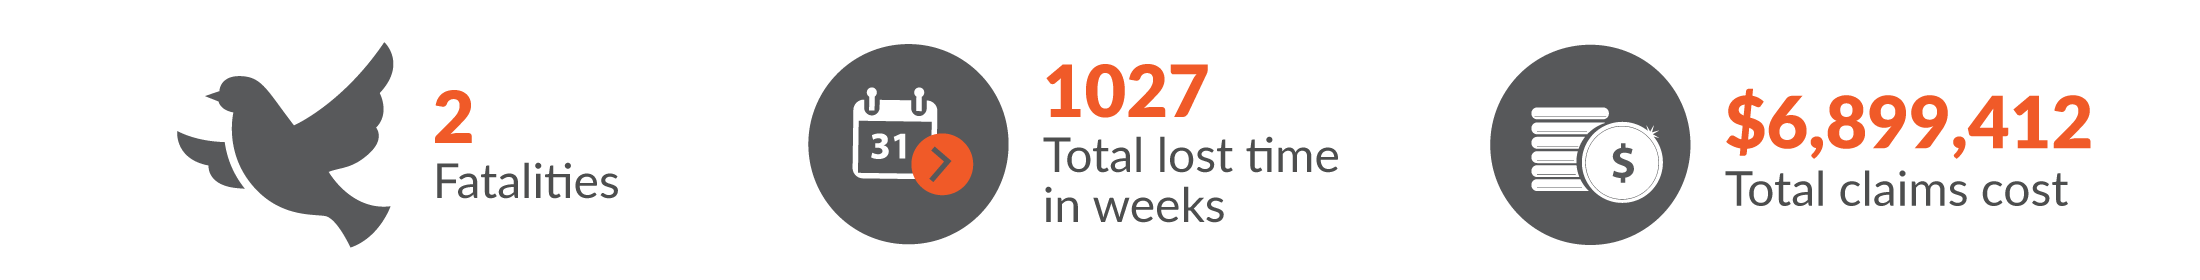 This infographic shows there were two fatalities in construction and total construction claims resulted in 1027 total lost time in weeks and $6,899,412 was paid in benefits.